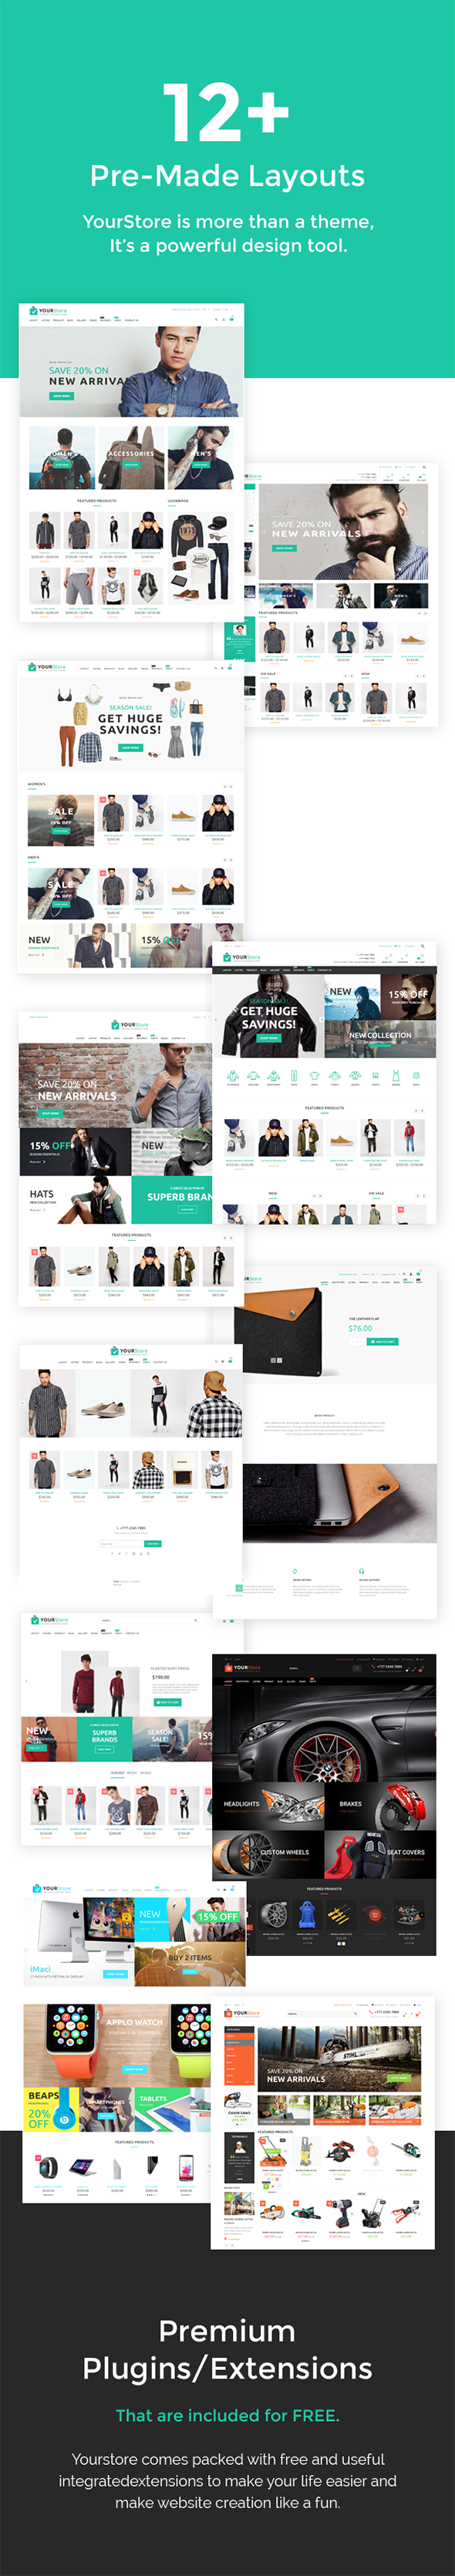 YourStore - Woocommerce theme - 3